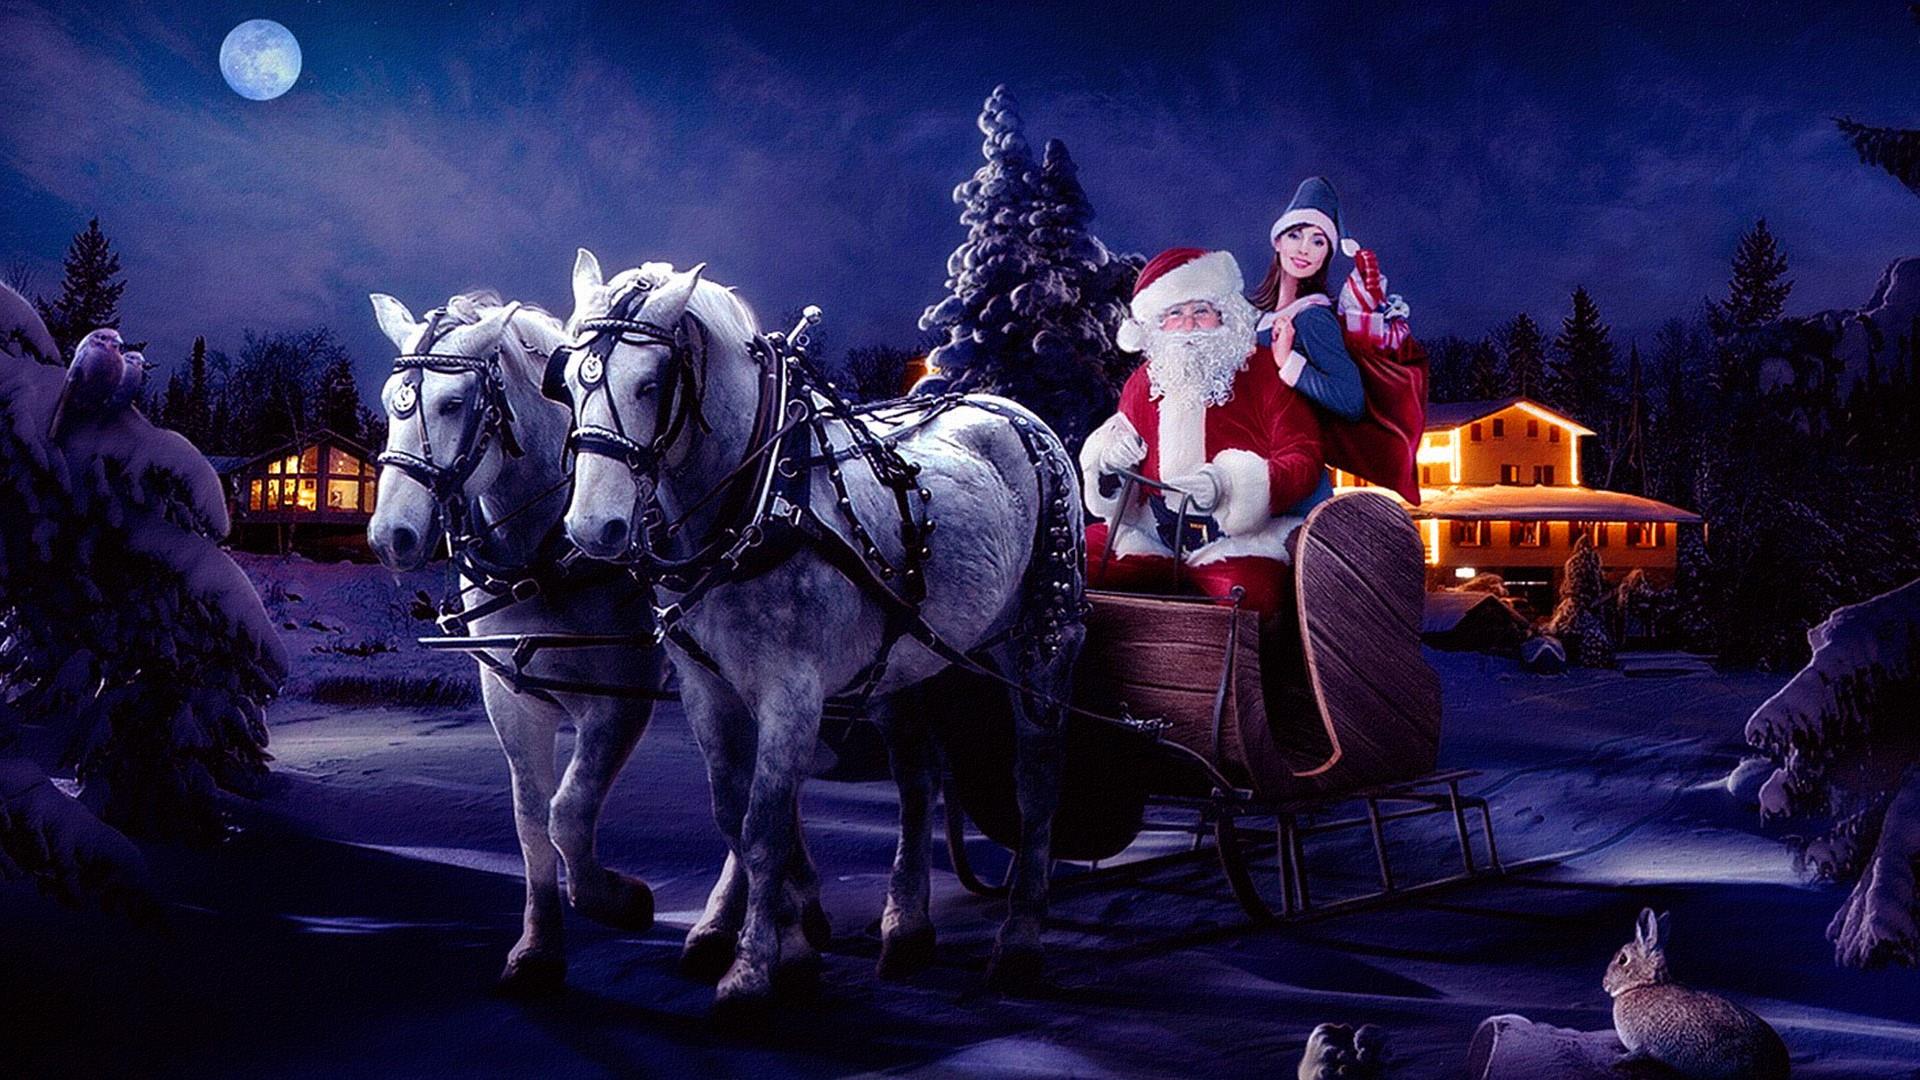 Santa Claus Carriage With Eight Deer Desktop Hd Wallpaper For Pc Tablet Android Mobile Download 1366×768 1920×1080